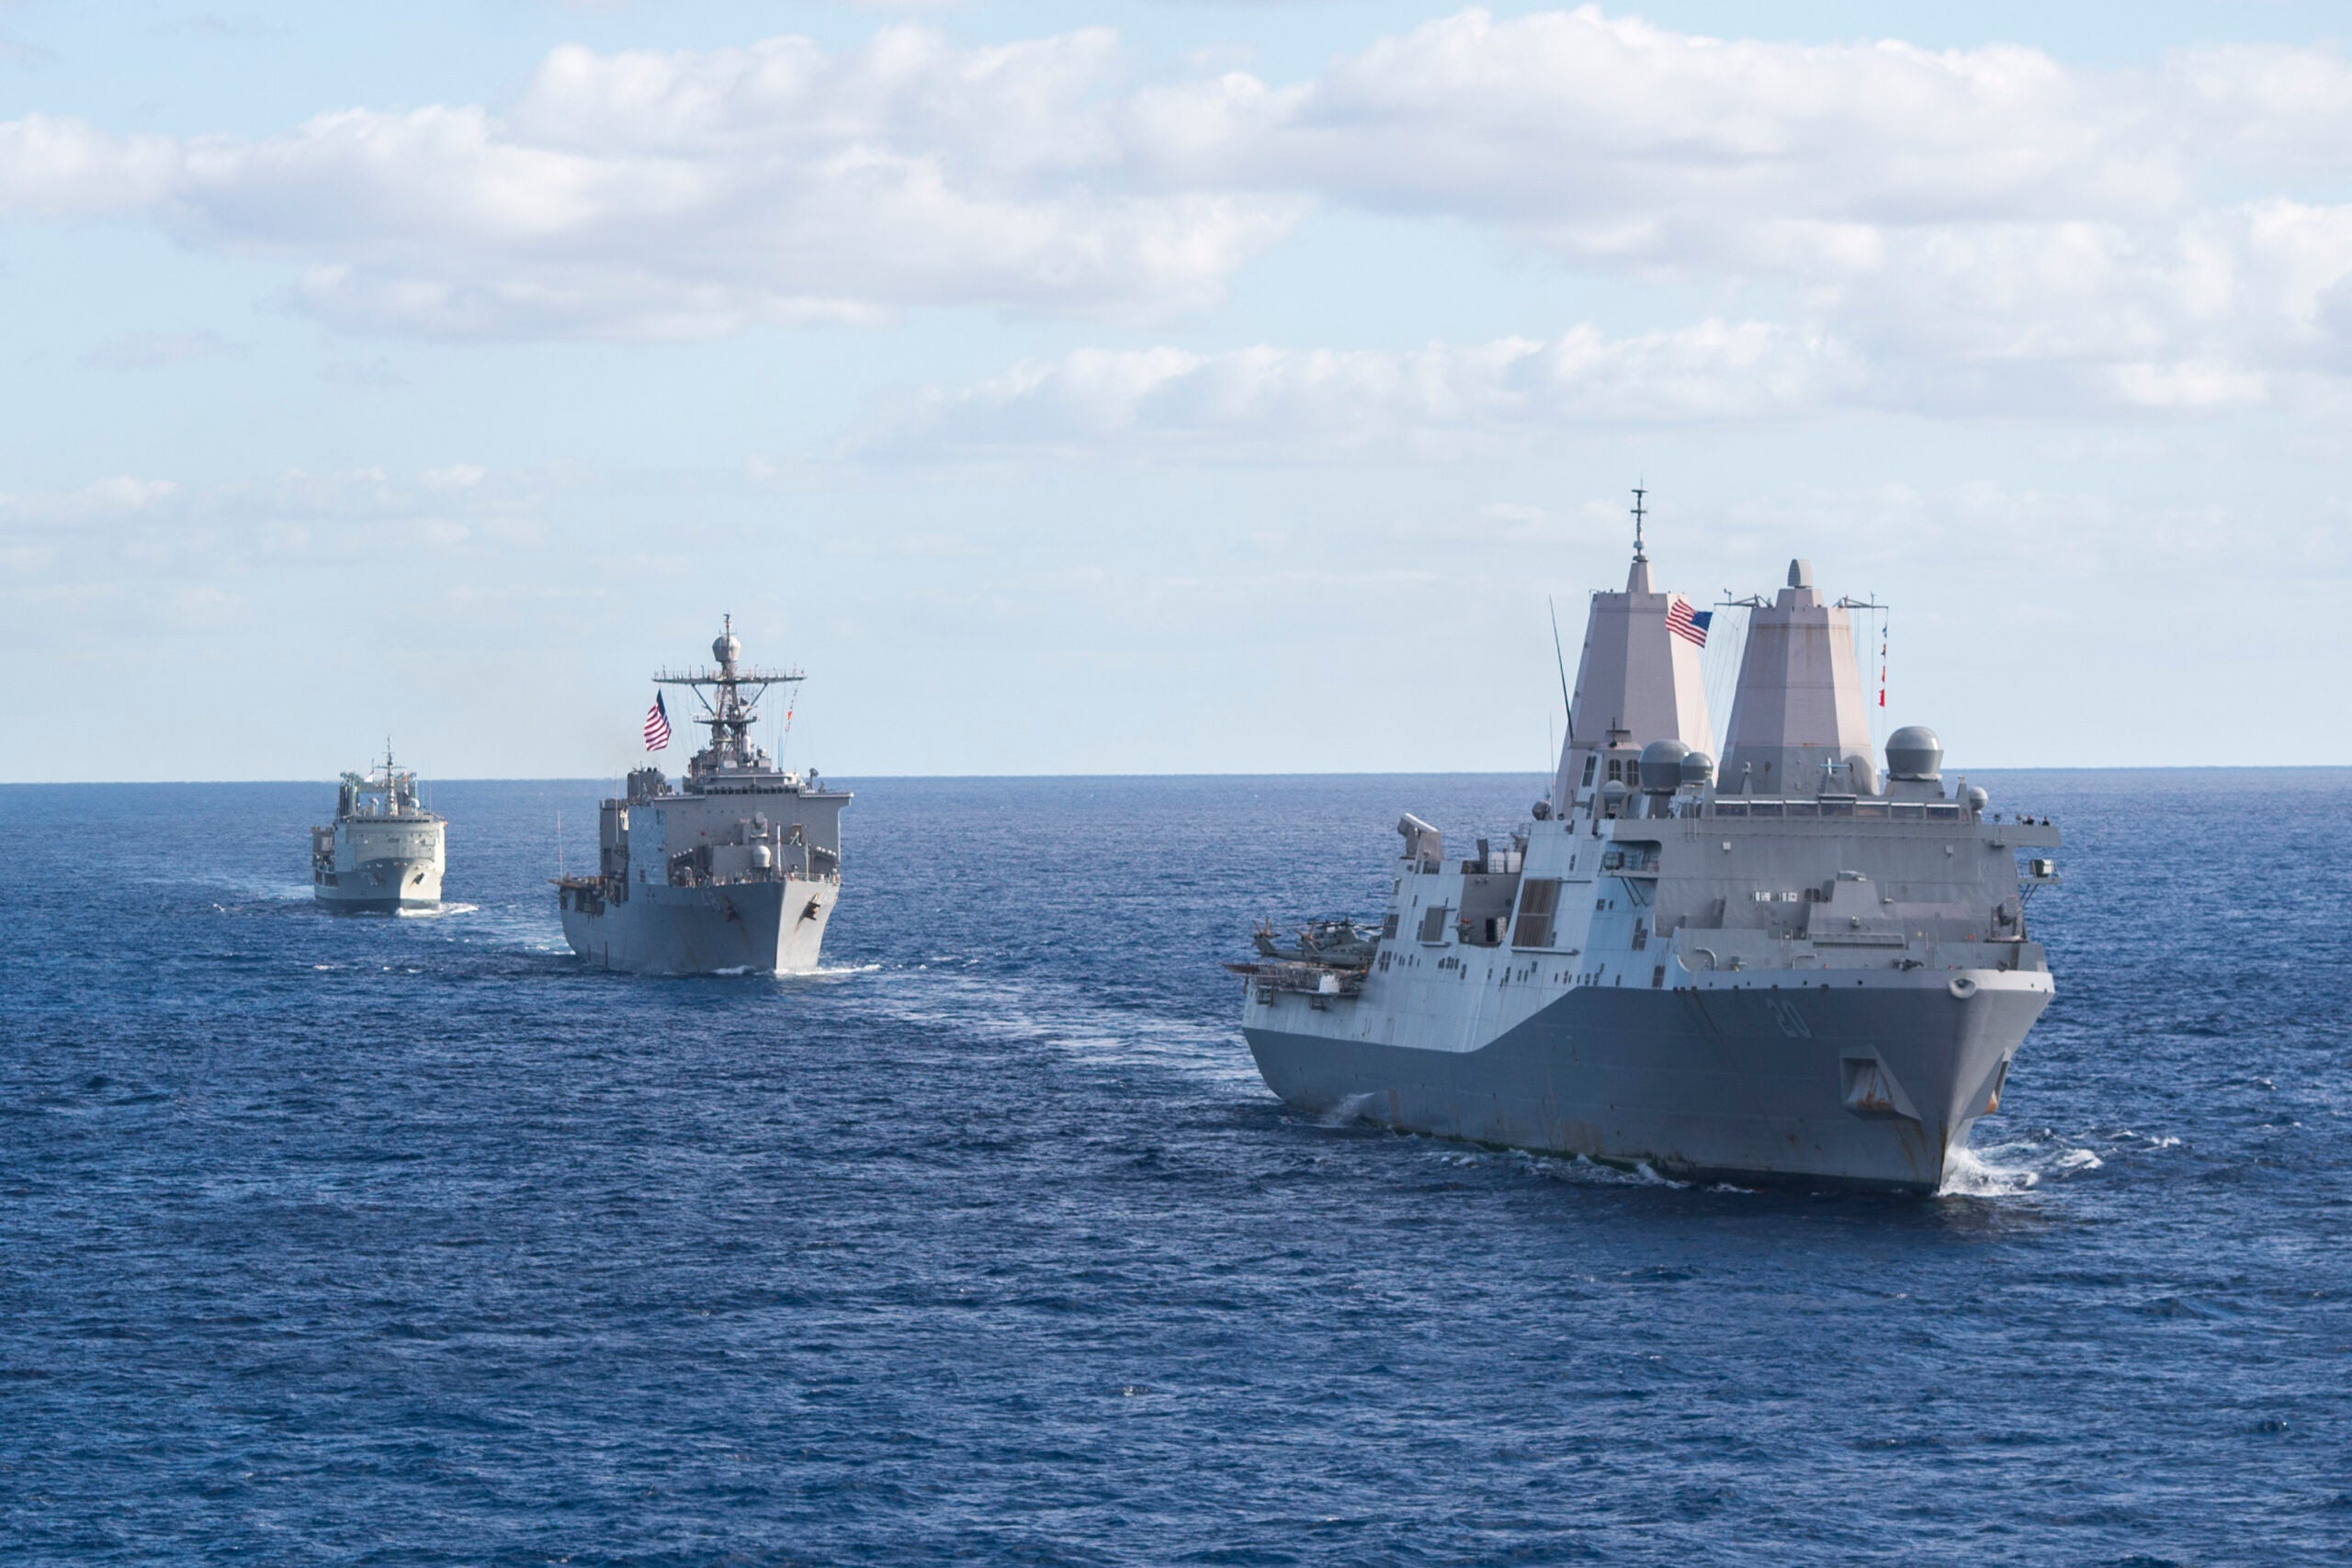 170722-N-YG104-011 CORAL SEA (July 22, 2017) The amphibious transport dock USS Green Bay (LPD 20), the dock landing ship USS Ashland (LSD 48) and a Royal Australian Navy replenishment oiler HMAS Success (OR 304) steam along with a Combined Amphibious Force during a mutli-ship sailing formation during Talisman Saber 17. Talisman Saber is a biennial U.S. bilateral exercise held off the coast of Australia meant to achieve interoperability and strengthen the U.S.-Australia alliance. (U.S. Navy photo by Mass Communication Specialist 2nd Class Sarah Villegas/Released)